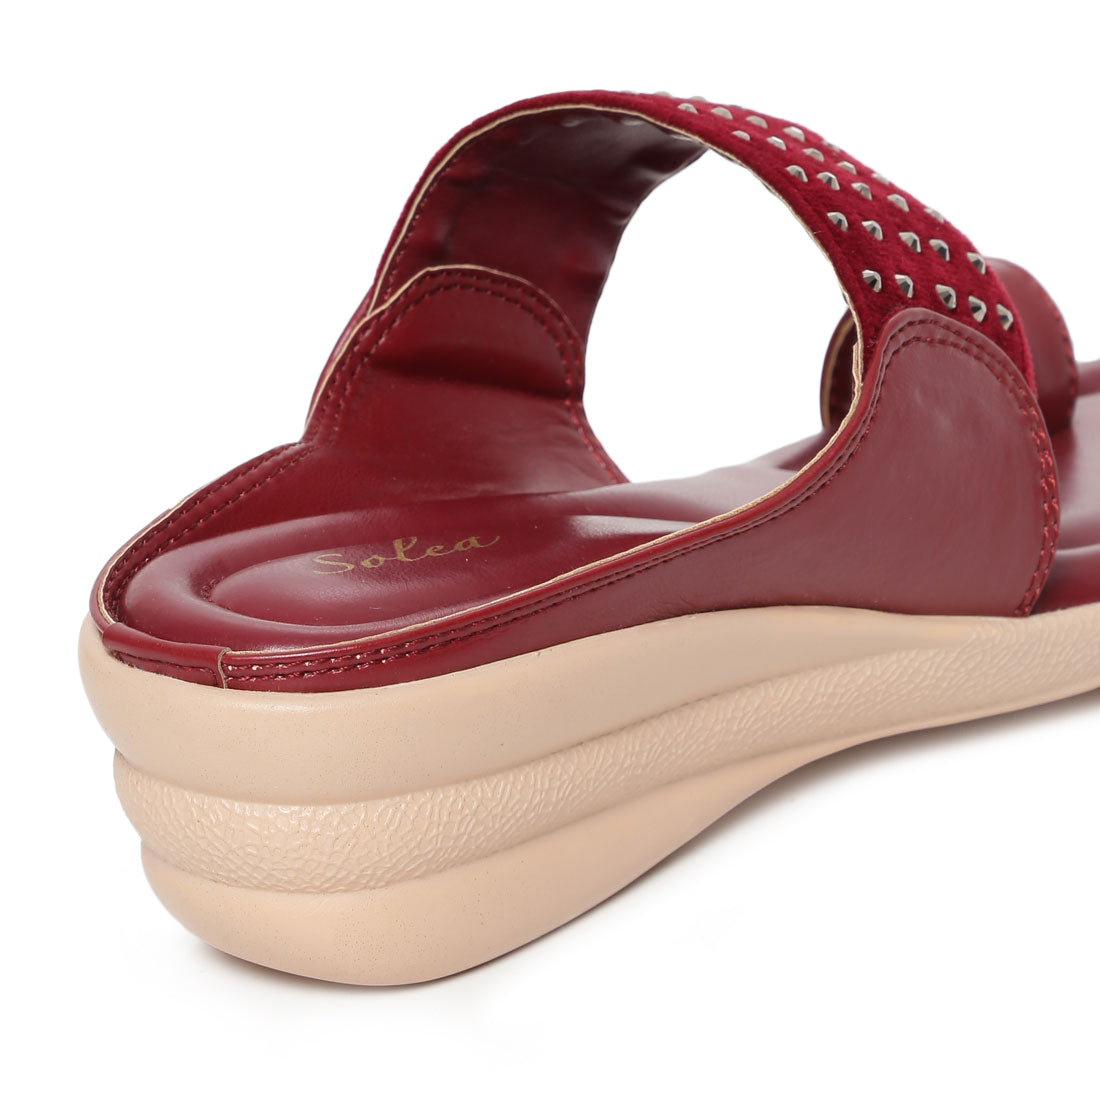 Paragon  K6012L Women Sandals | Casual &amp; Formal Sandals | Stylish, Comfortable &amp; Durable | For Daily &amp; Occasion Wear